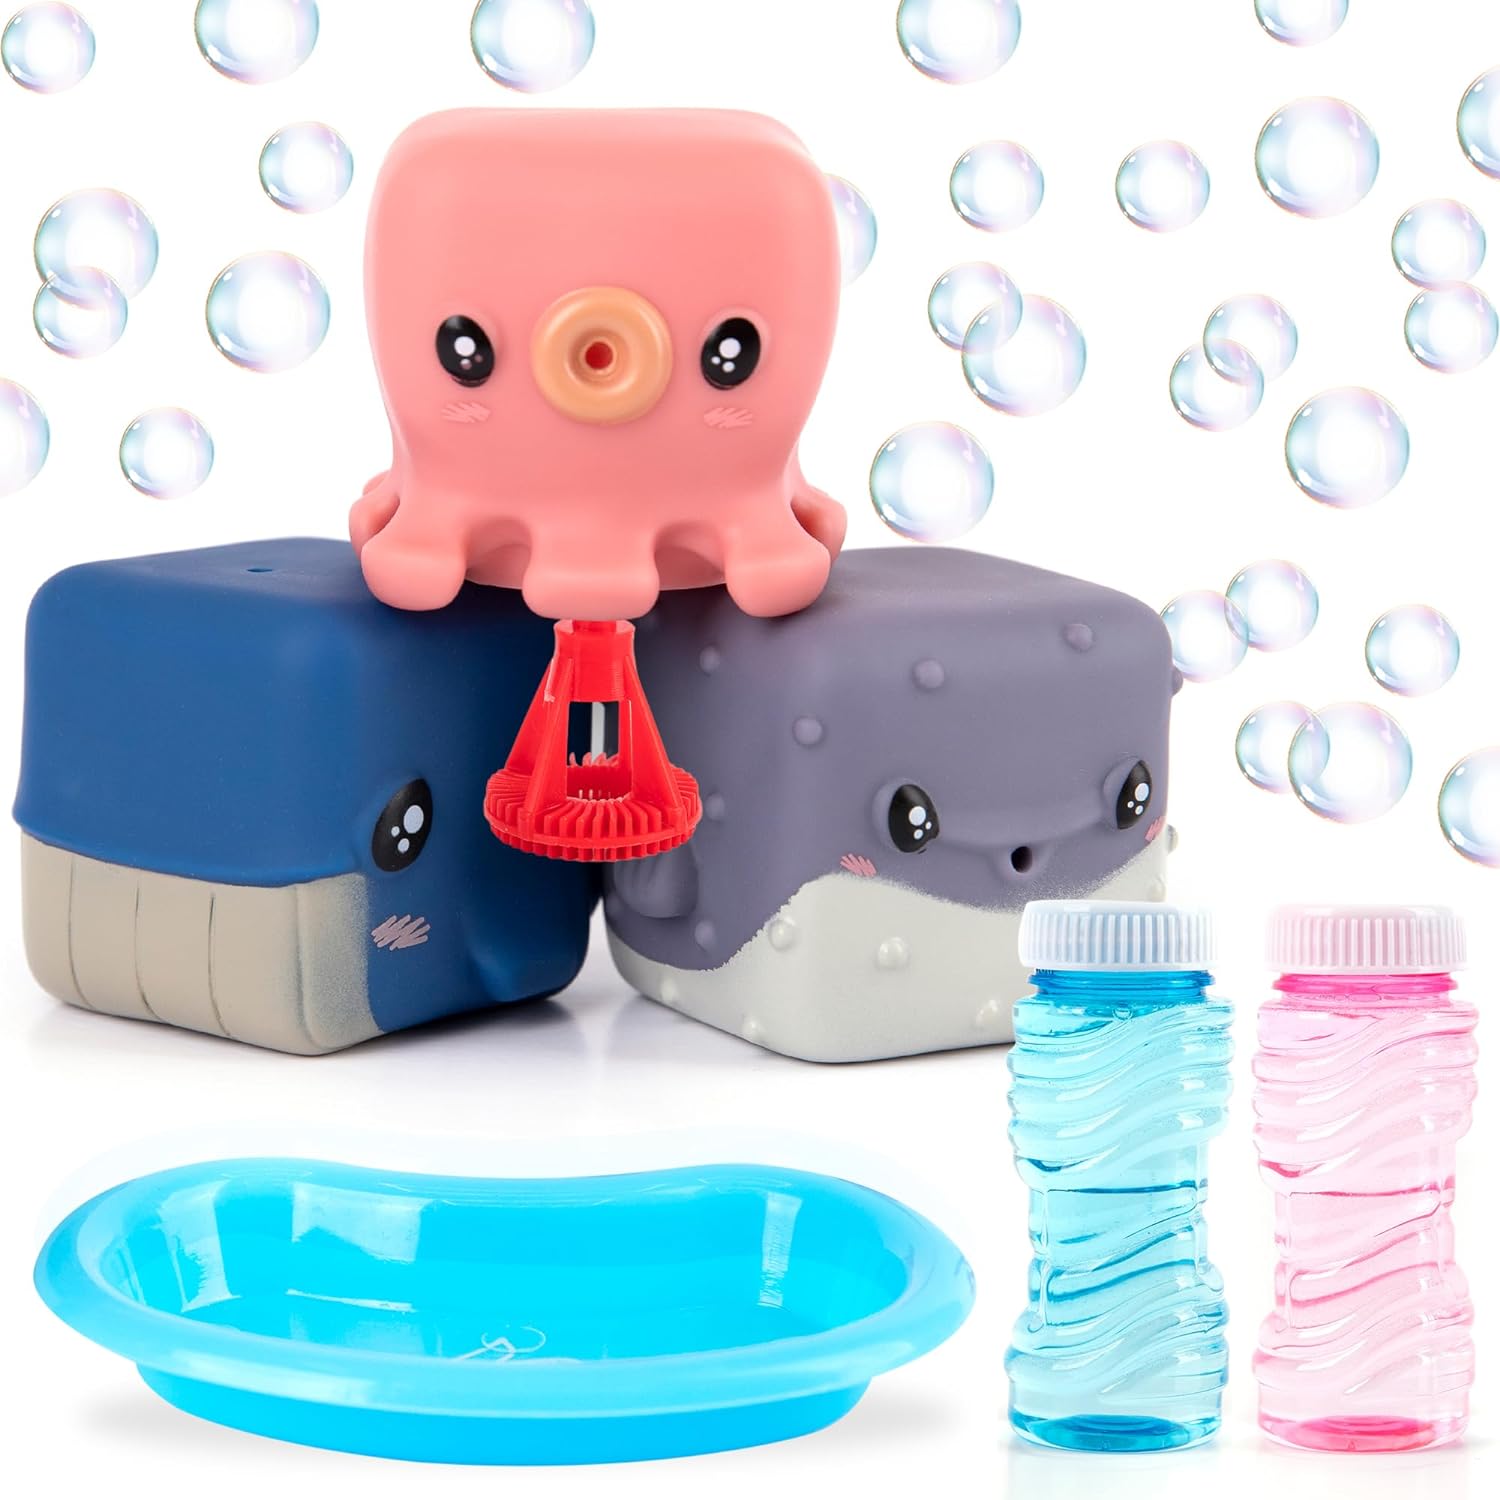 ArtCreativity Bubble Blowing Animals for Kids - Set of 3 - Animal Bubble Toys with 2 Bottles of Bubble Solution and Dipping Tray